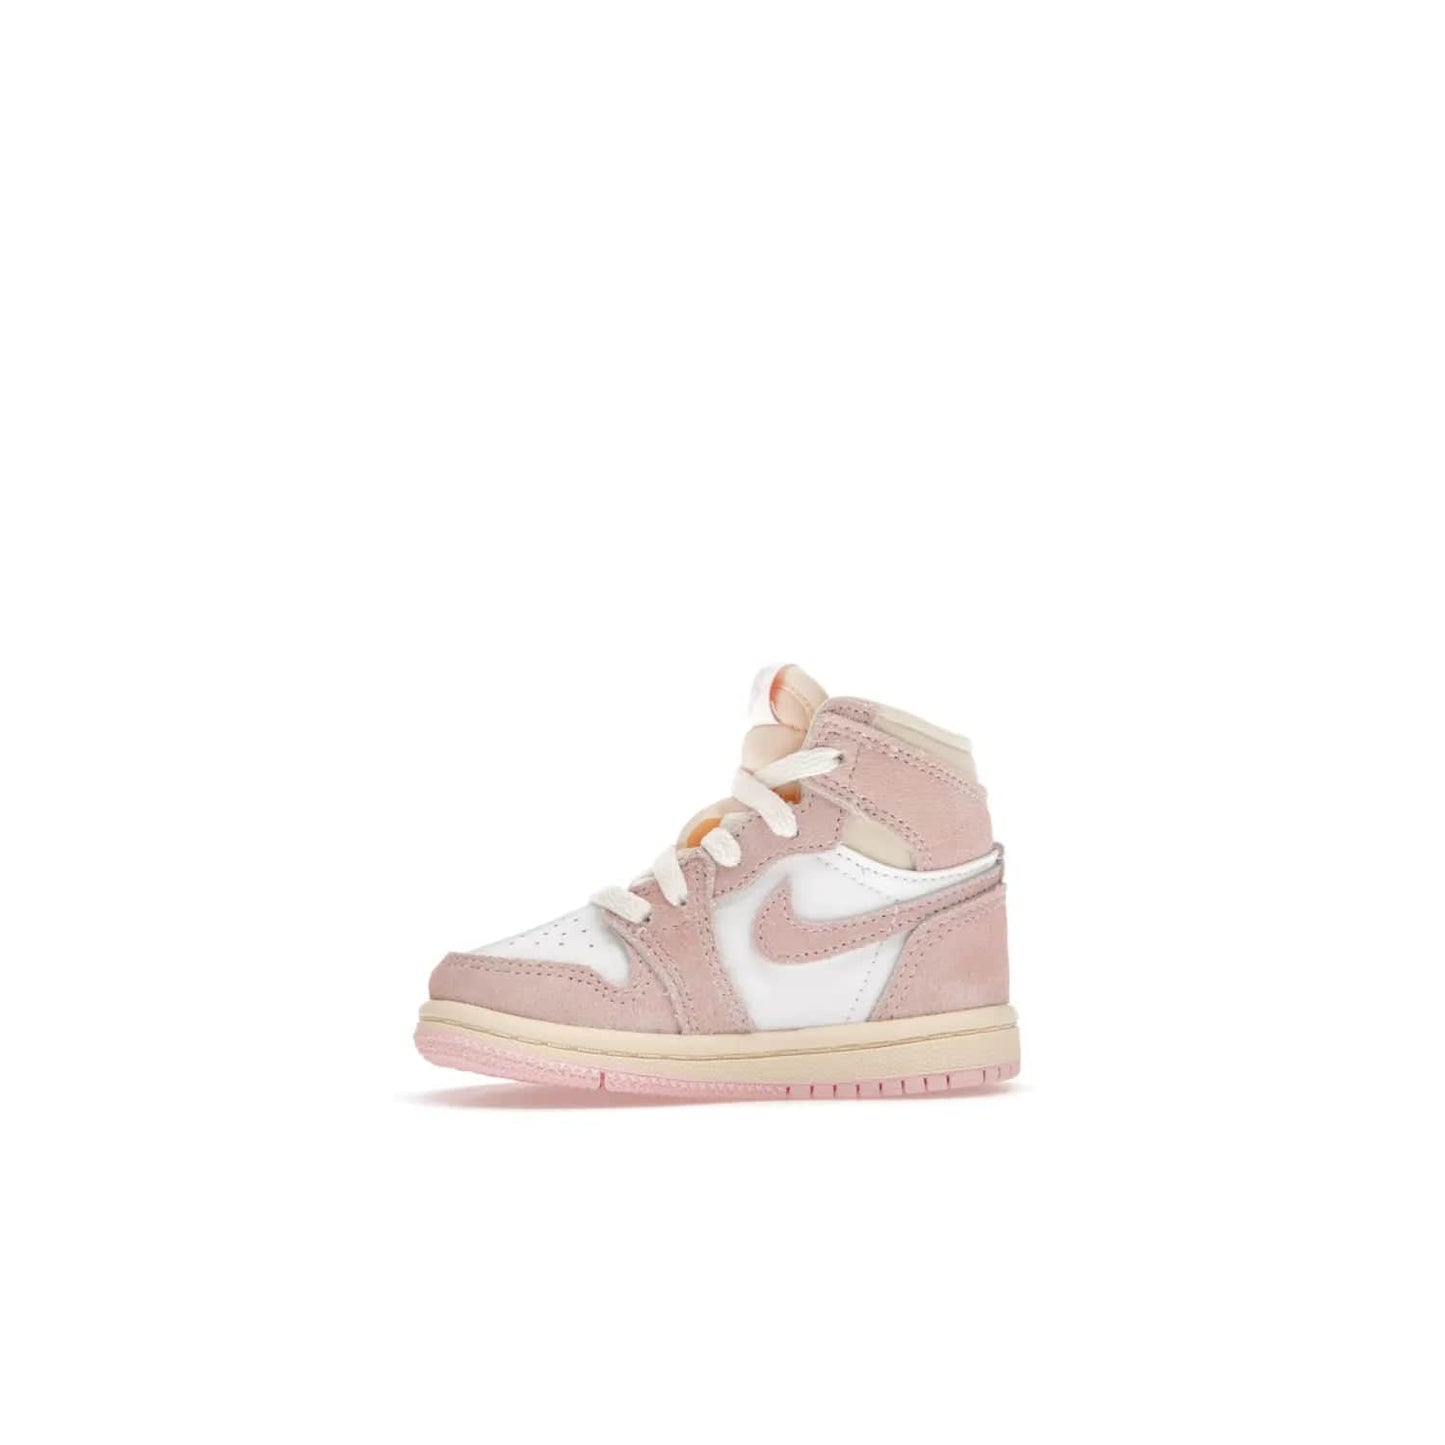 Jordan 1 Retro High OG Washed Pink (TD) - Image 18 - Only at www.BallersClubKickz.com - Retro style meets modern comfort: Introducing the Jordan 1 High OG Washed Pink (TD). Combining Atmosphere/White/Muslin/Sail colors with a high-rise silhouette, these shoes will be an instant classic when they release April 22, 2023.